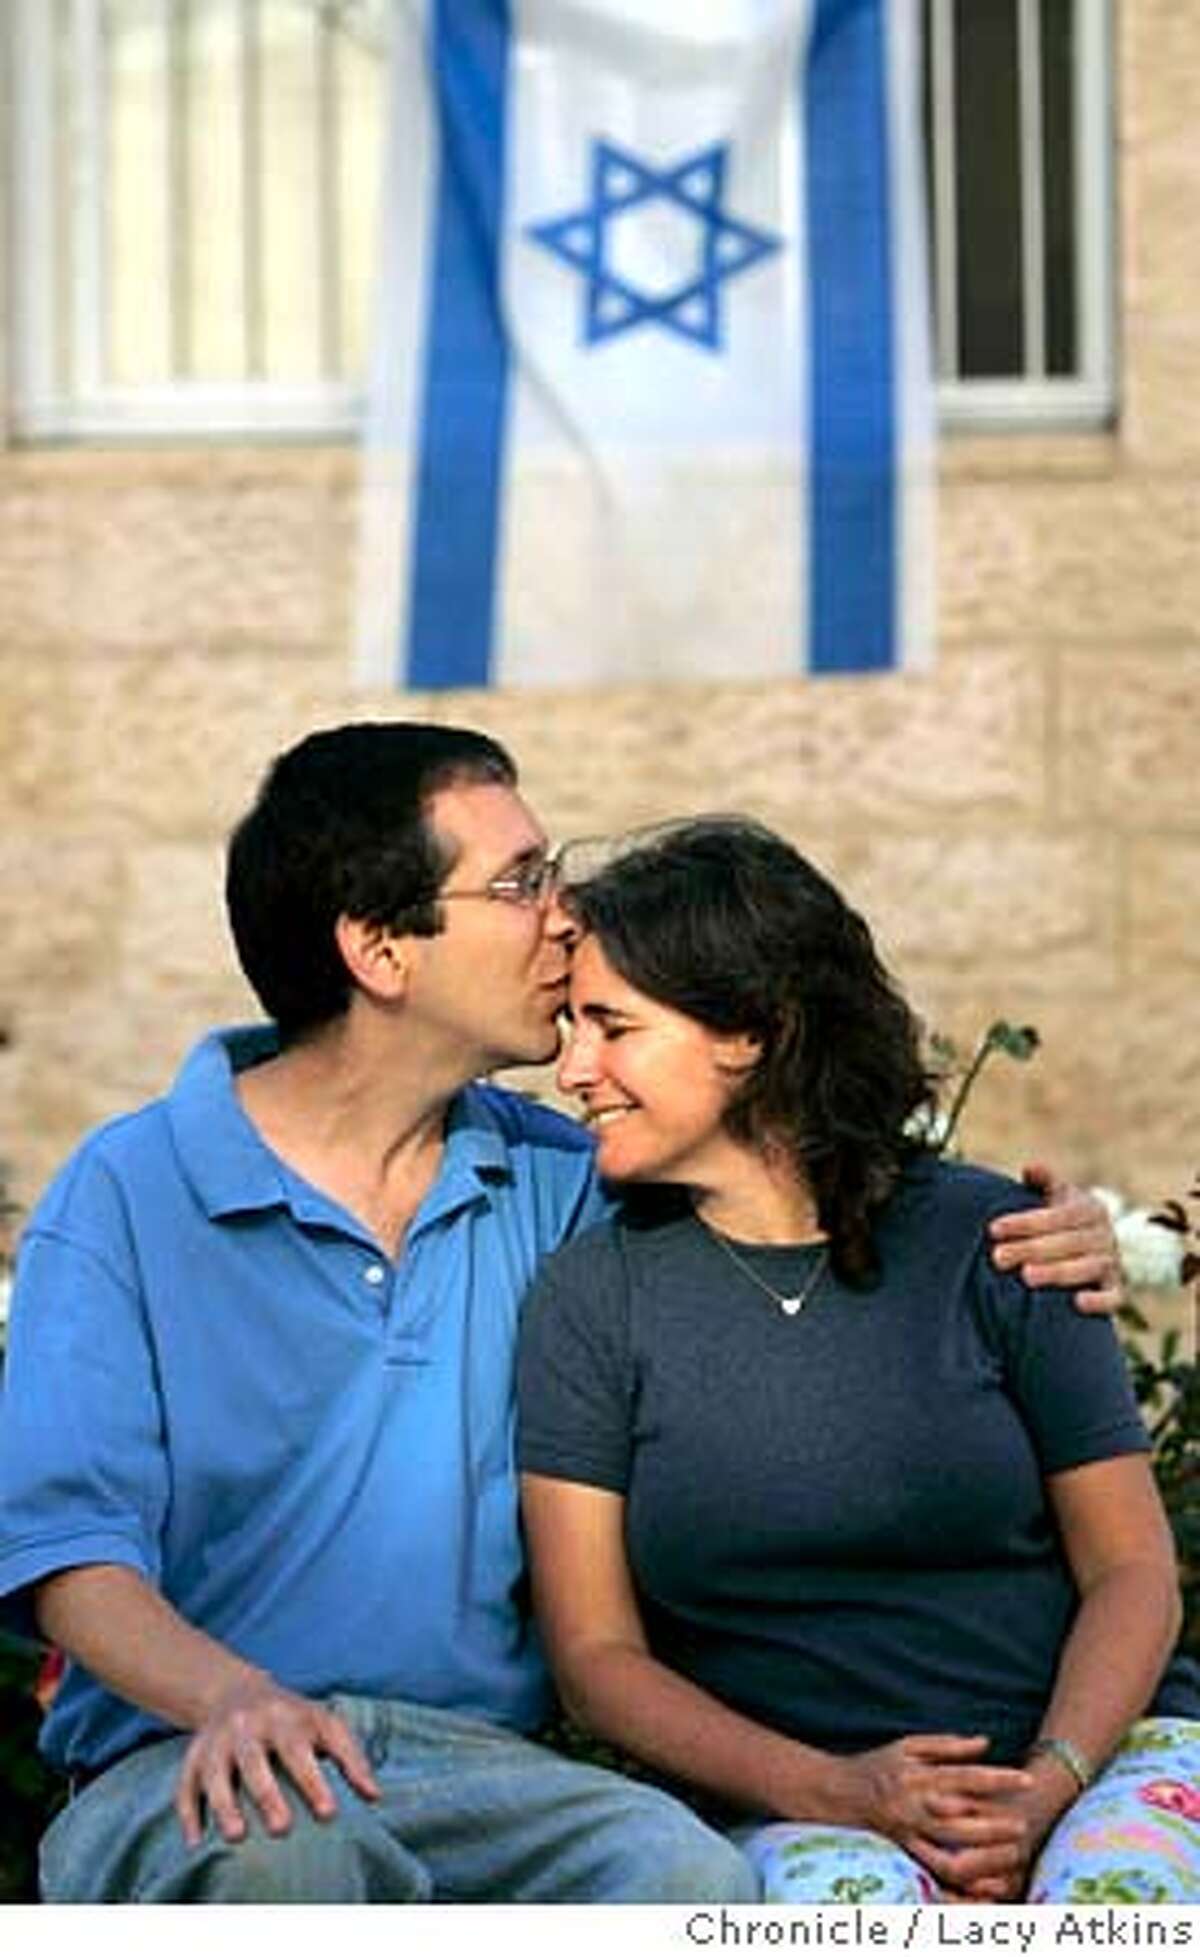 Brian Blum with his wife Jody, at home in Jerusalem, June 16, 2005, in Israel. Brian is from Berkeley and followed his roots to Israel. He's just a normal guy with the exception that his cousin, Marla Bennett was killed in a cafe by a suicide bomber and a bus blow-up along his jogging route moments before he was there. Photographer Lacy Atkins